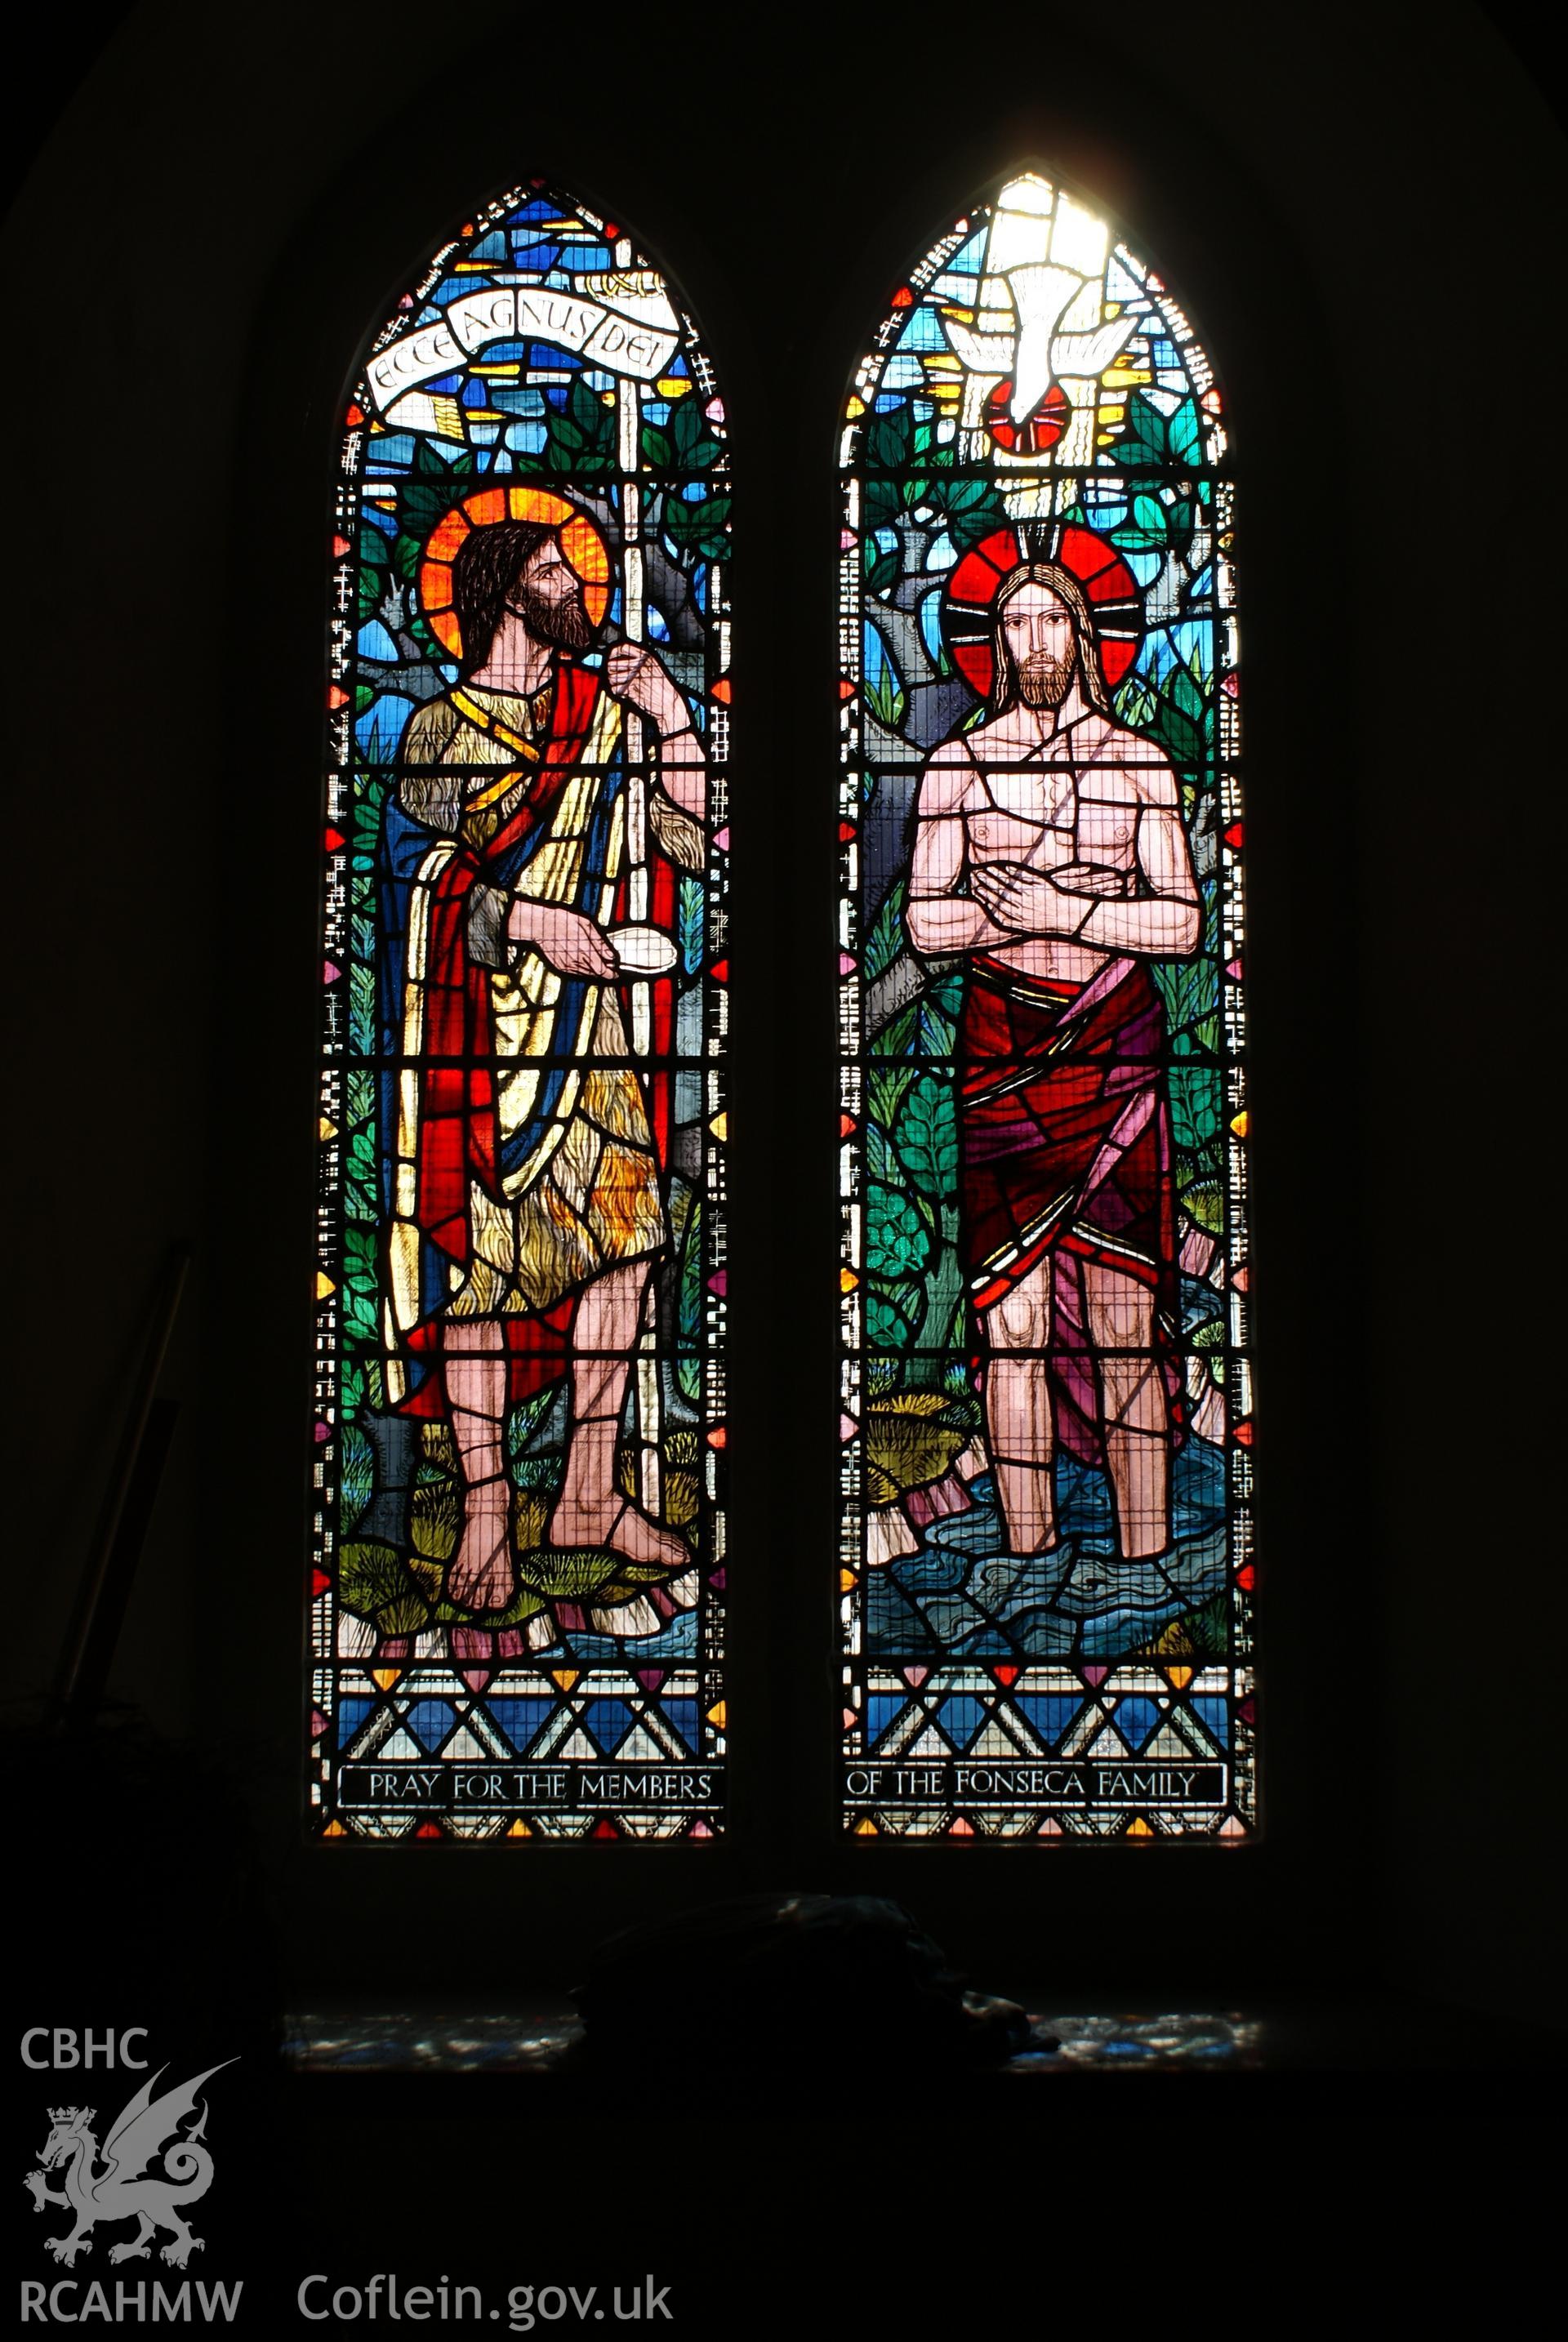 Digital colour photograph showing stained glass windows depicting St Peter and St Paul at All Saints Catholic church, Ebbw Vale.